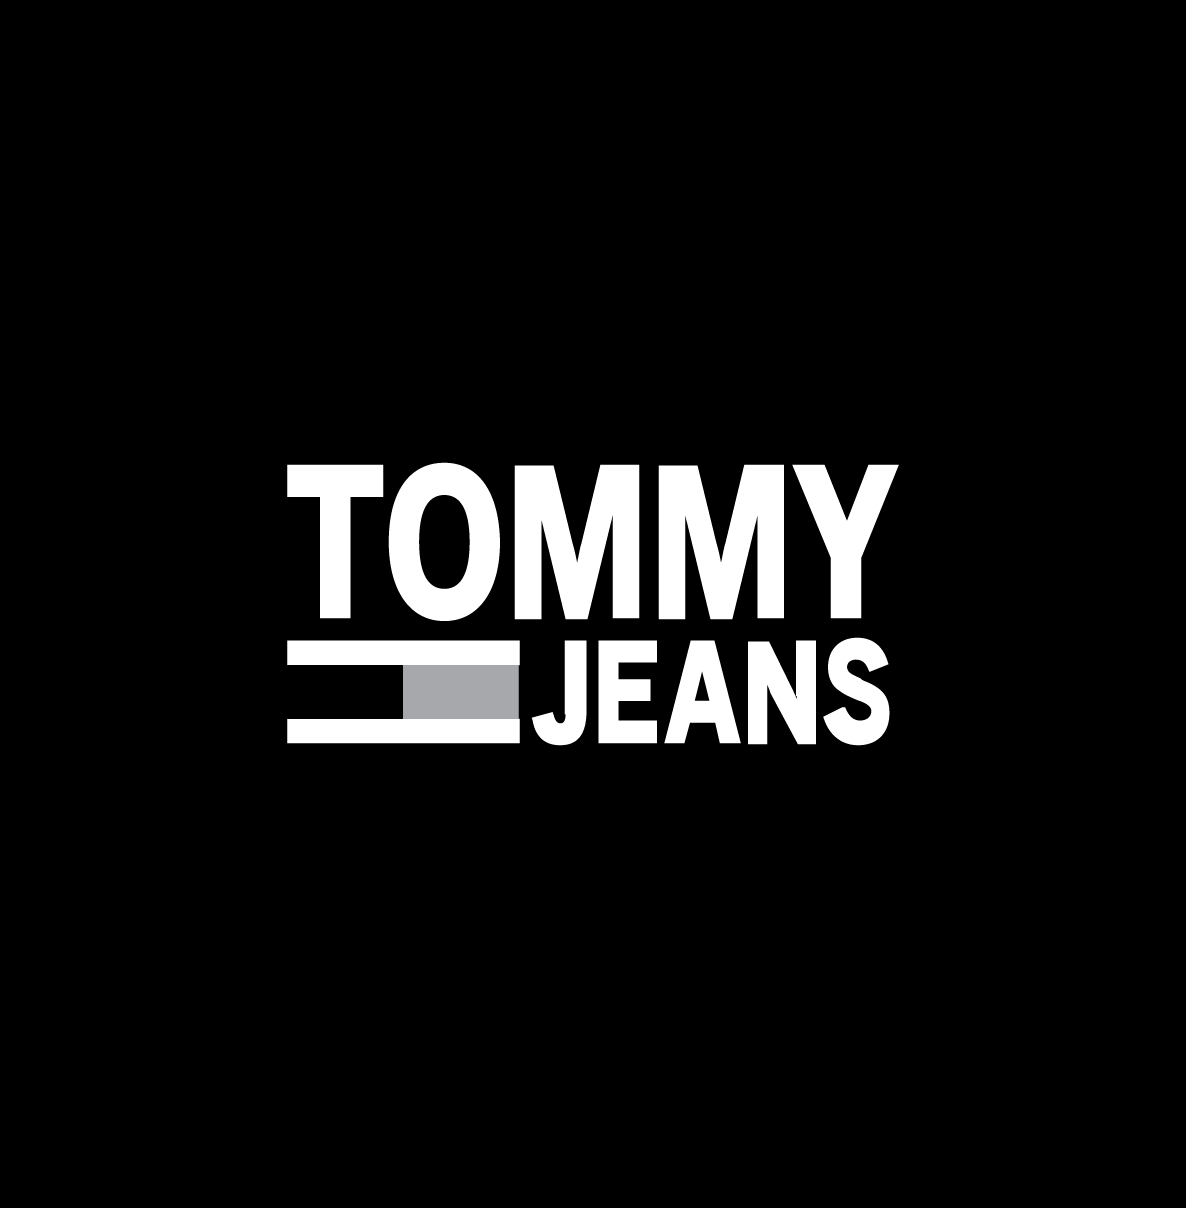 Tommy Jeans - Hudson Holdings